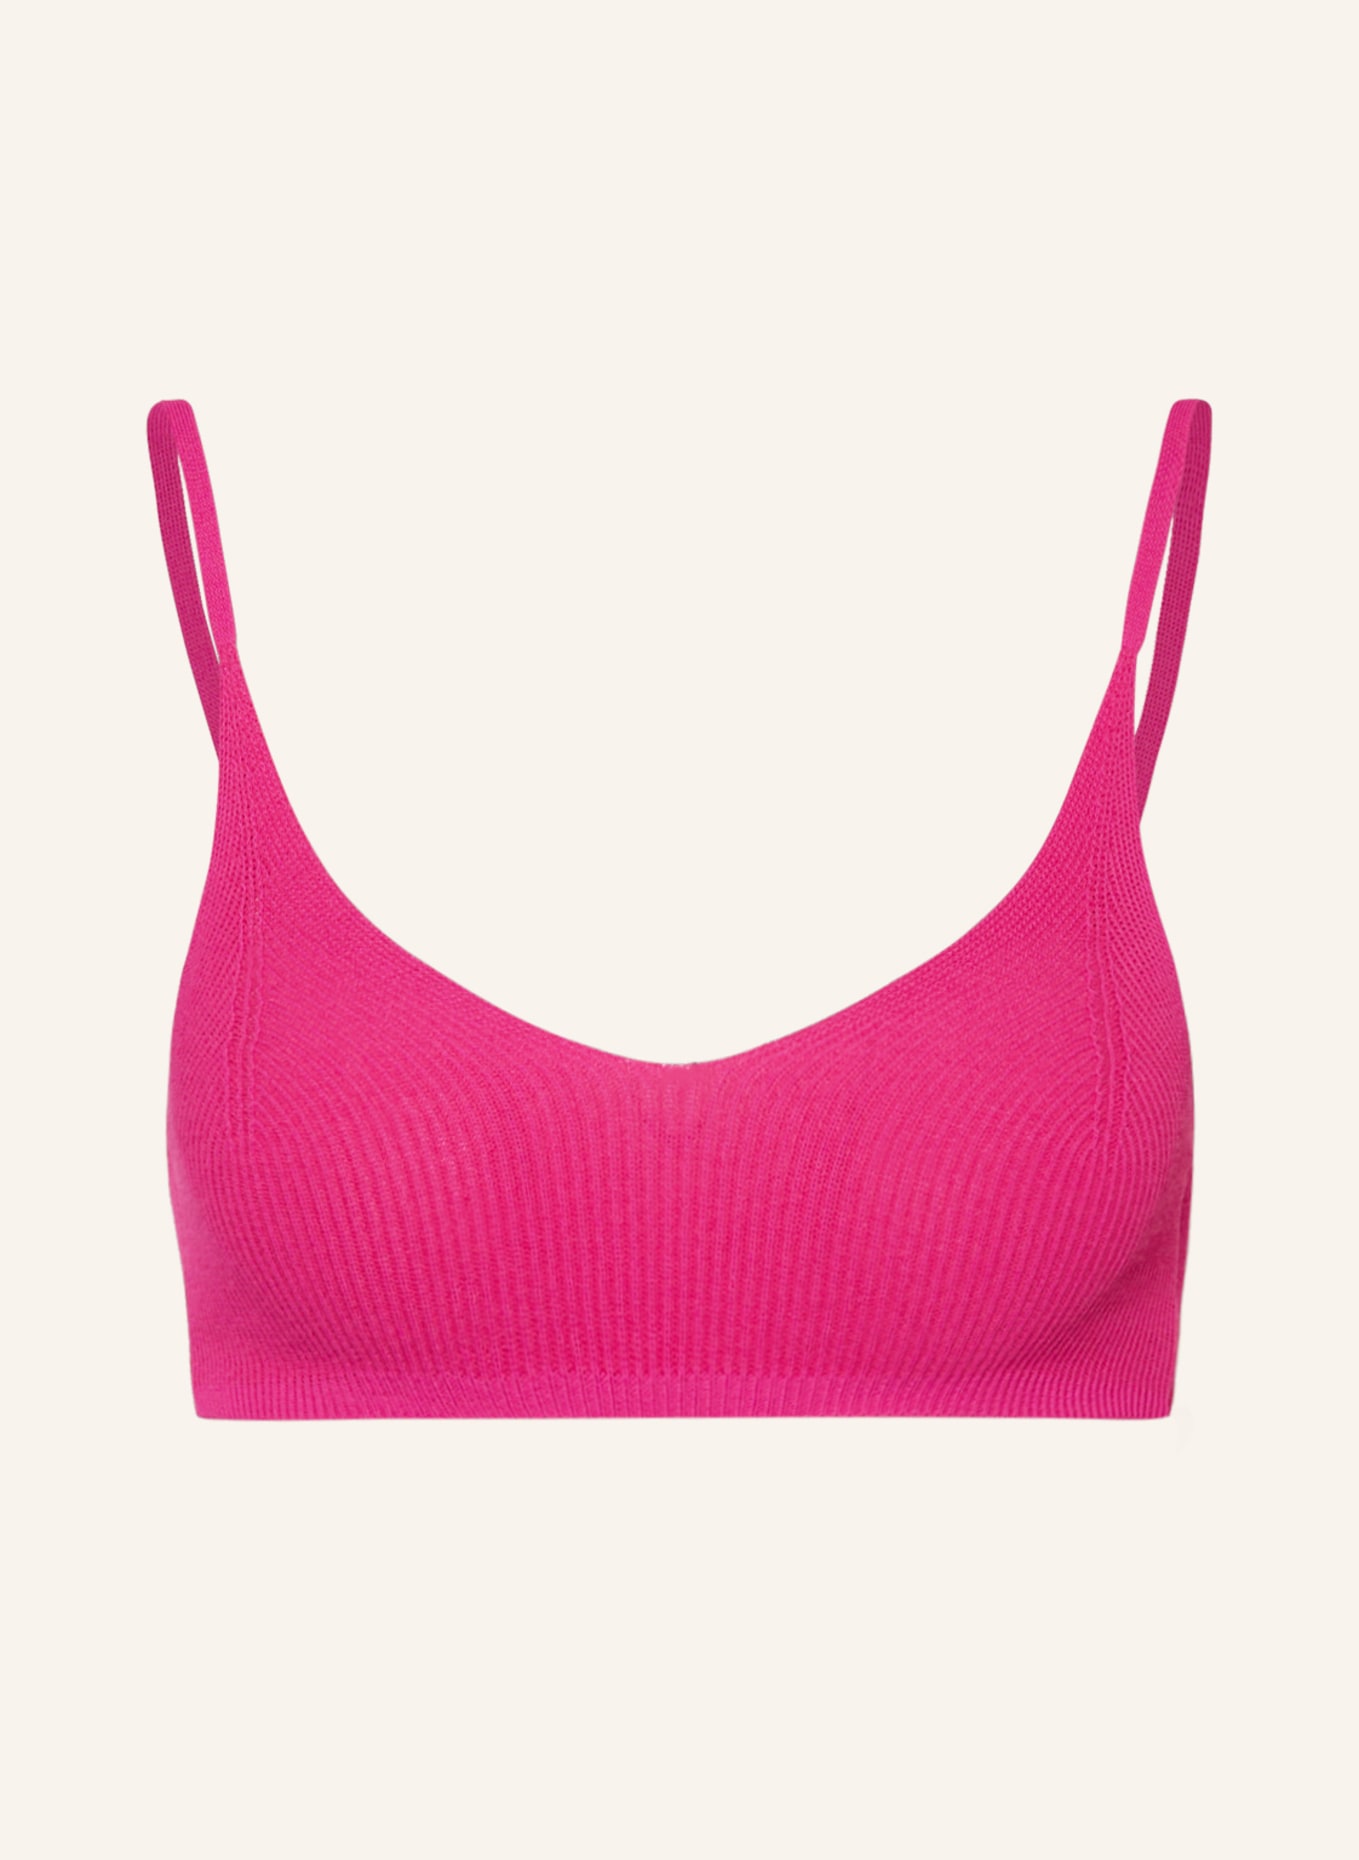 JACQUEMUS Cropped-Stricktop LE BANDEAU VALENSOLE, Farbe: PINK (Bild 1)